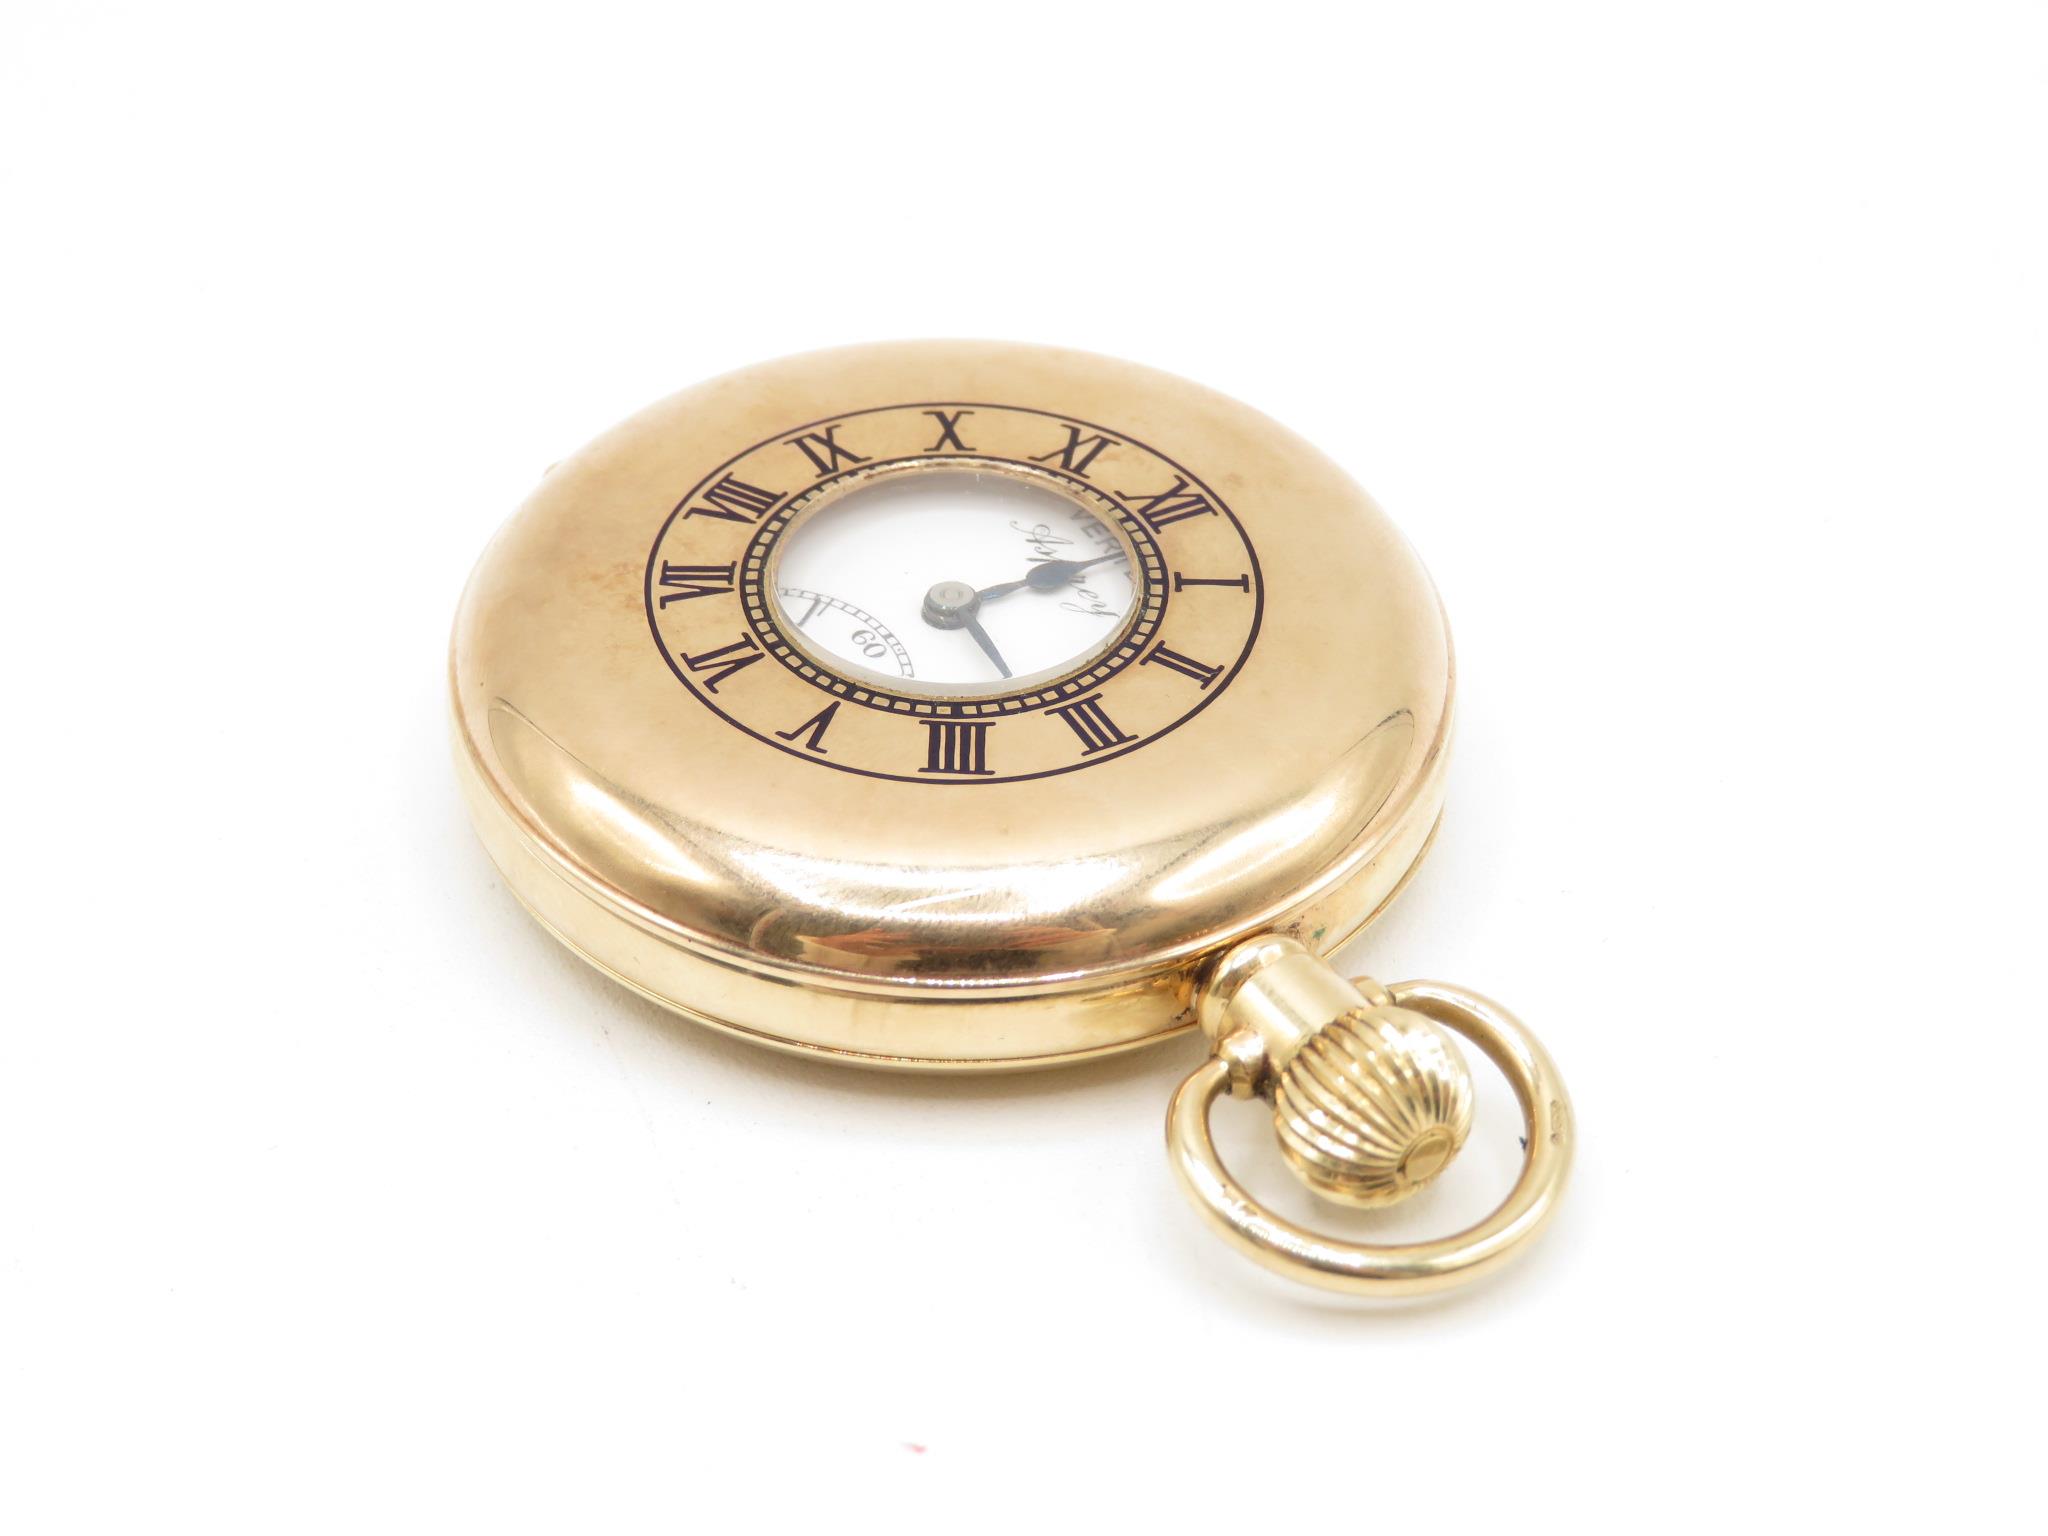 9ct gold gent's pocket watch by Vertex for Asprey signed 50 years loyal service J Summers and Sons - Image 6 of 9